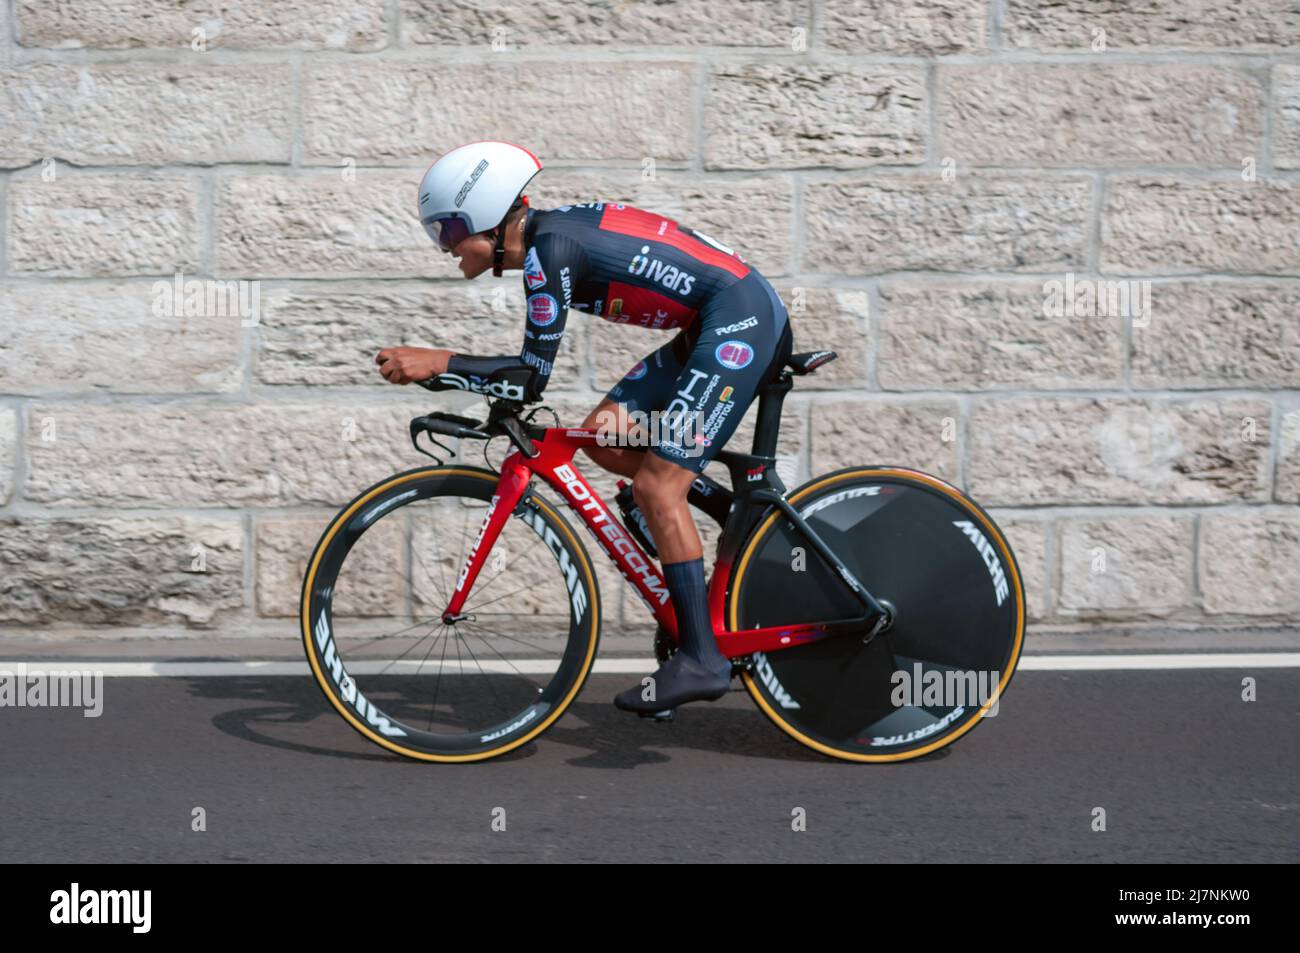 BUDAPEST, HUNGARY - MAY 07, 2022: Pro cyclist Jefferson Cepeda DRONE HOPPER - ANDRONI GIOCATTOLI, Giro D'Italia Stage 2 Time trial - cycling competiti Stock Photo